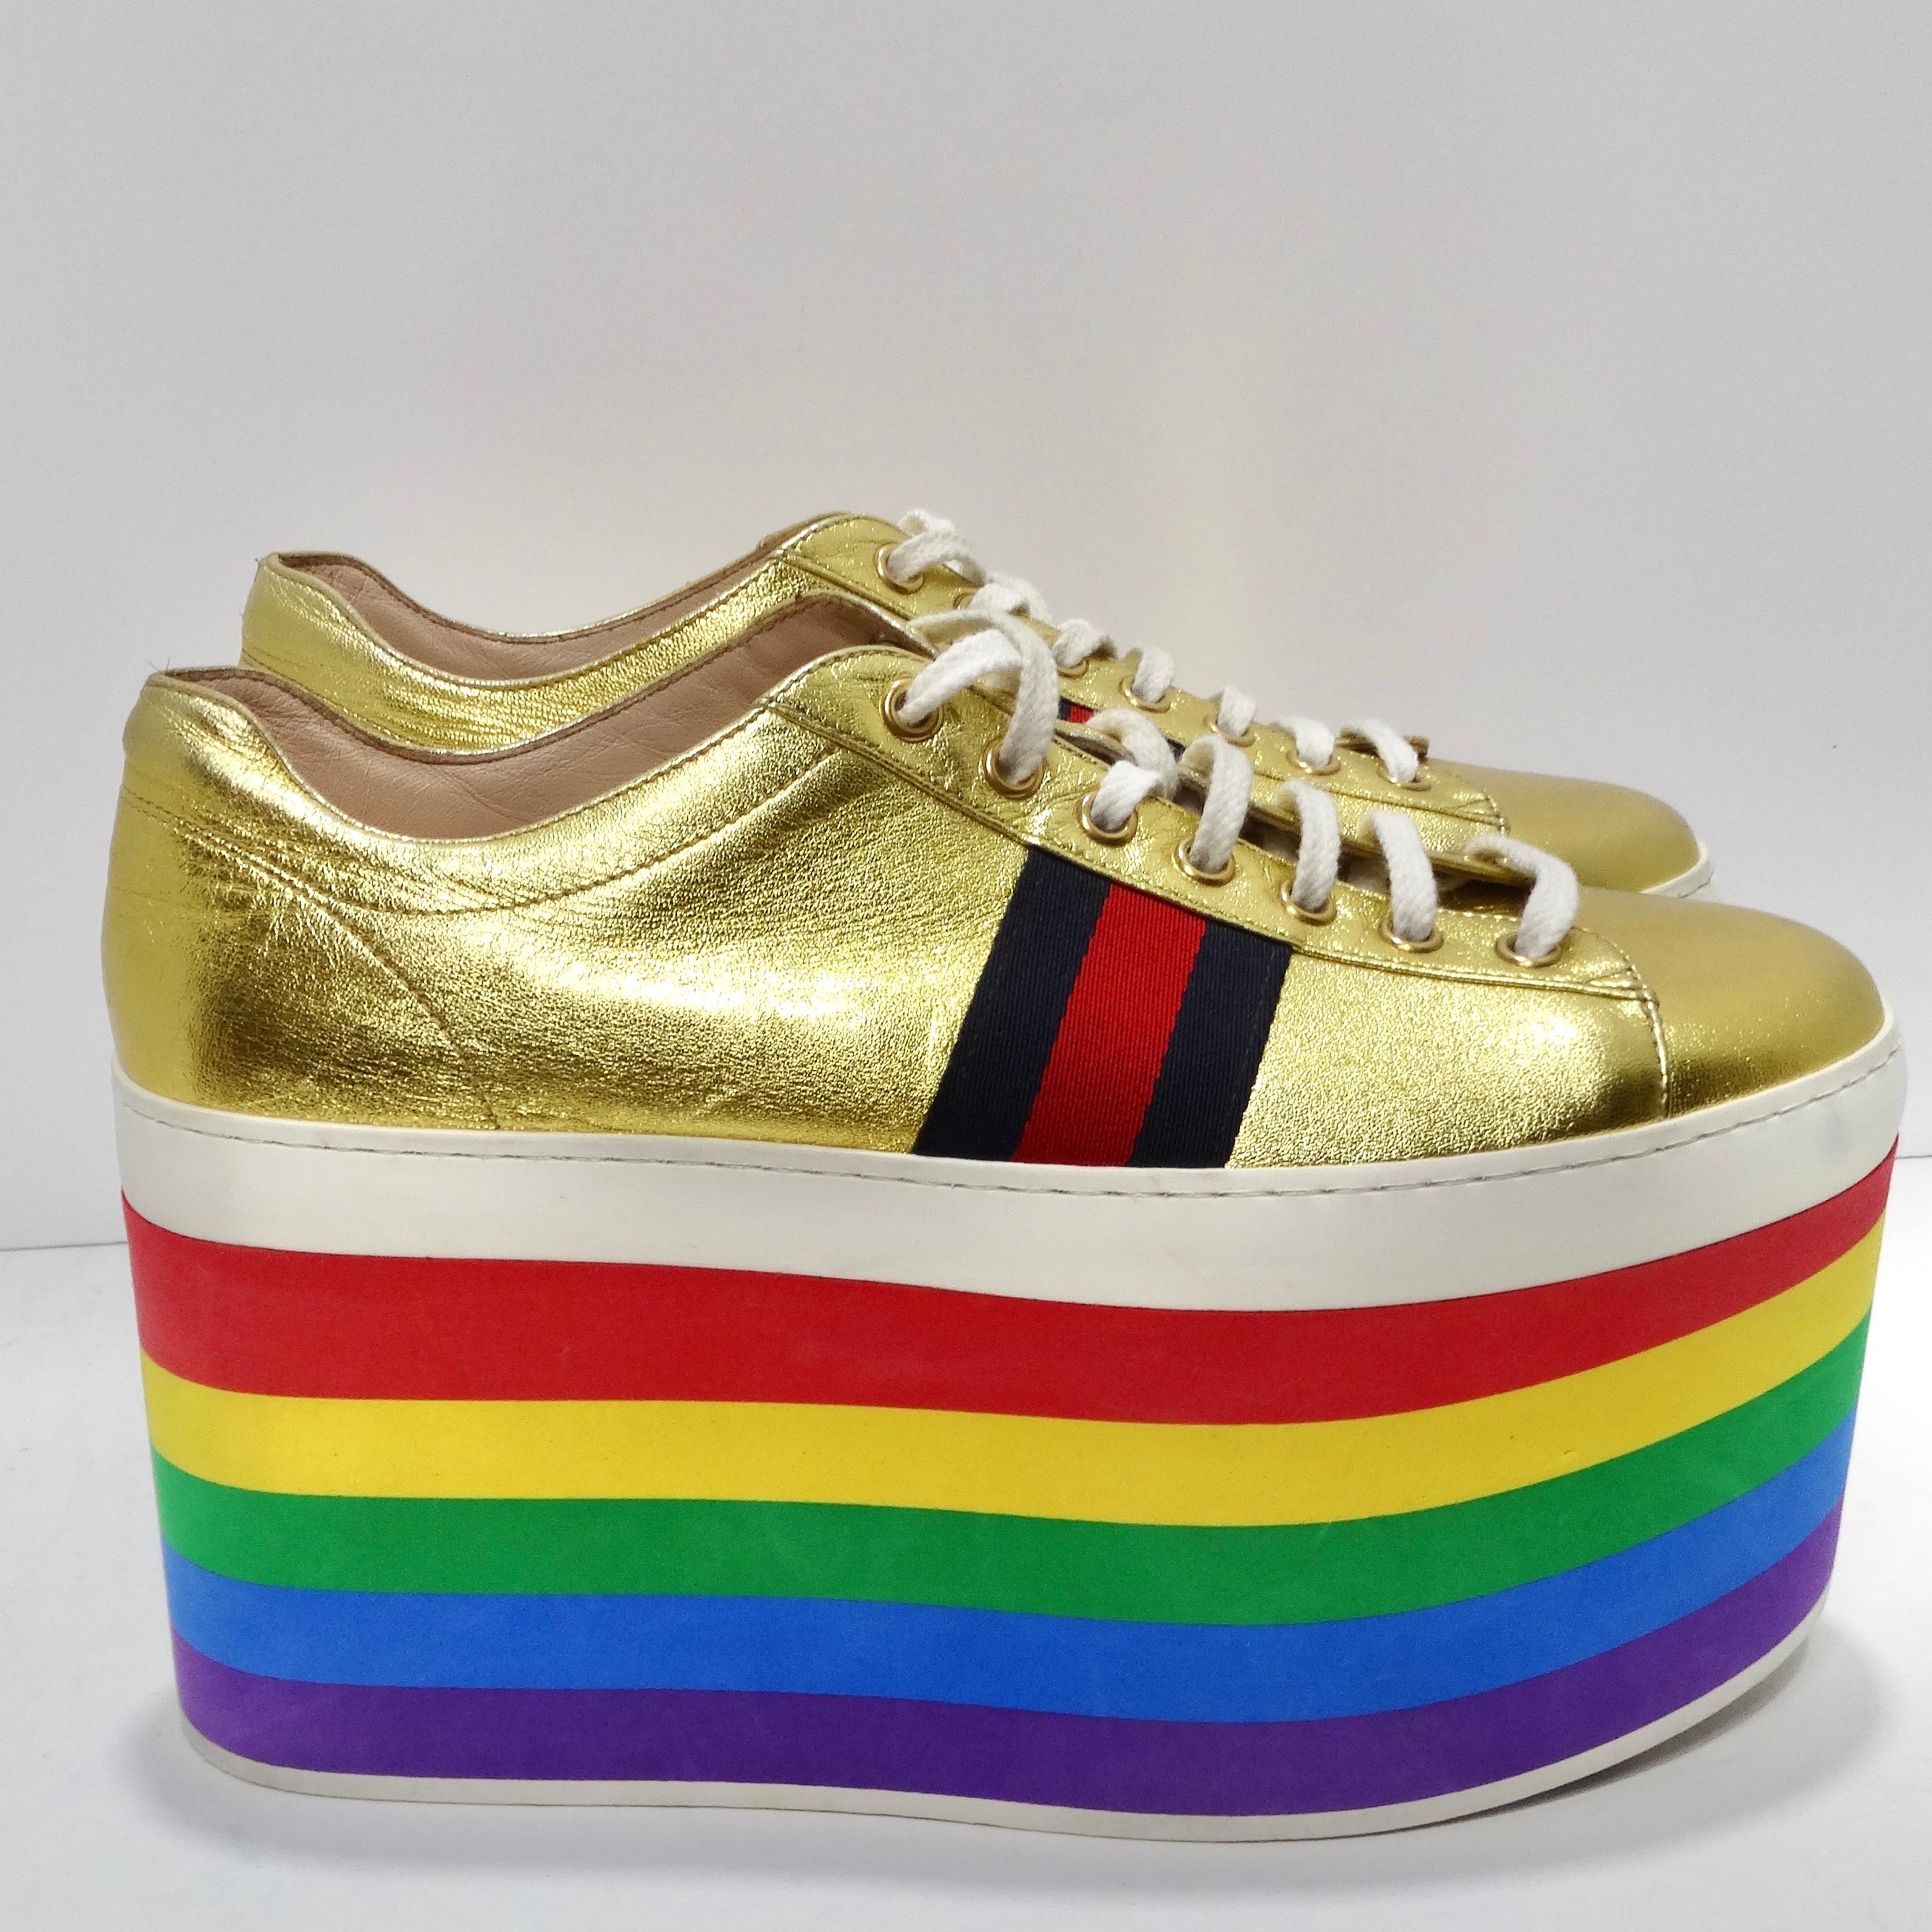 Gucci Peggy Rainbow Platform Sneakers In Excellent Condition For Sale In Scottsdale, AZ